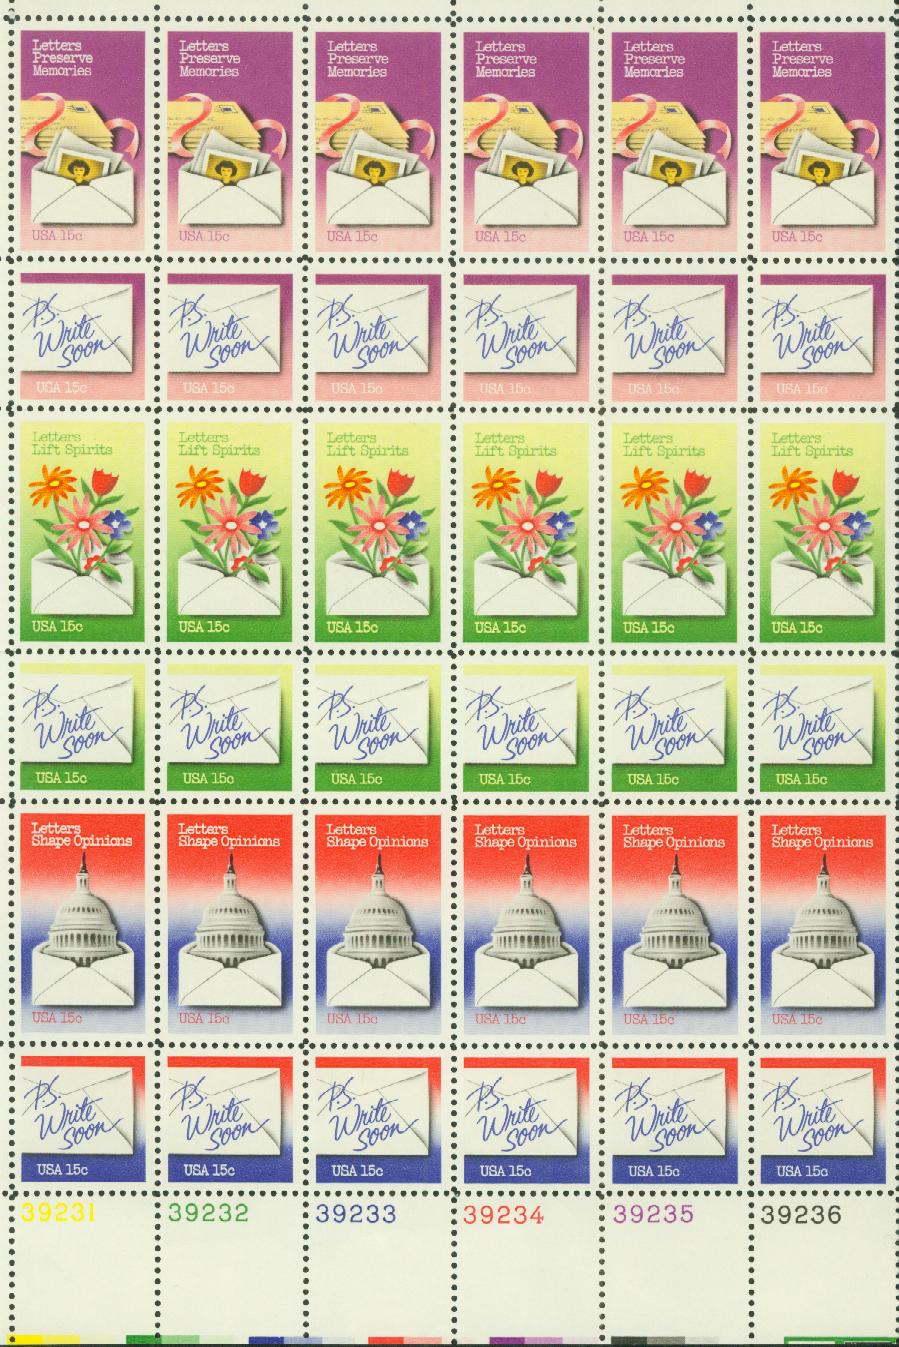 10 Vintage Postage Letter Writing Stamps Unused P.S. Write Soon Vintage 15  Cent Green Postage Stamps for Mailing